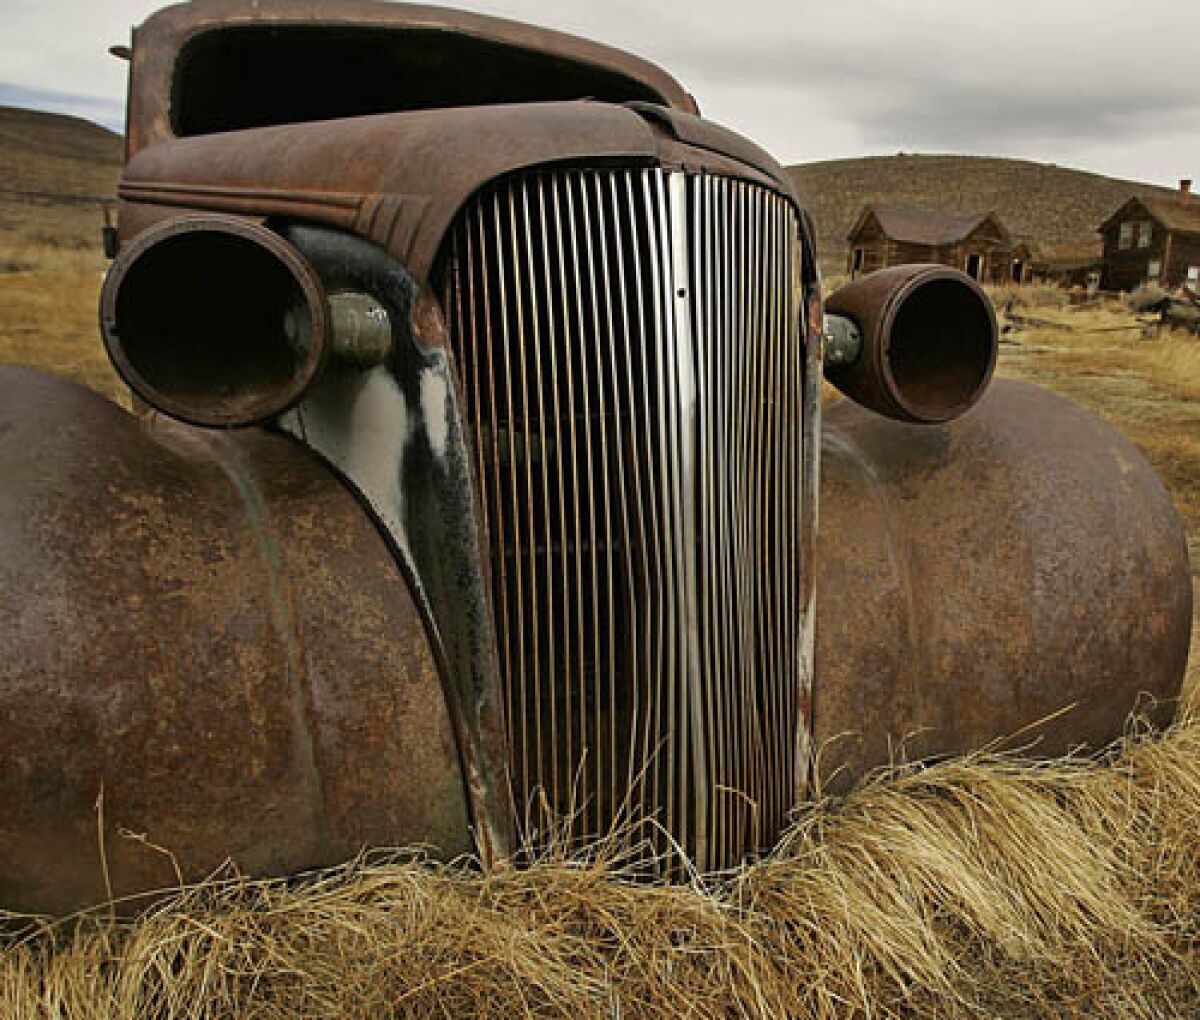 An old rusted car in a dry field